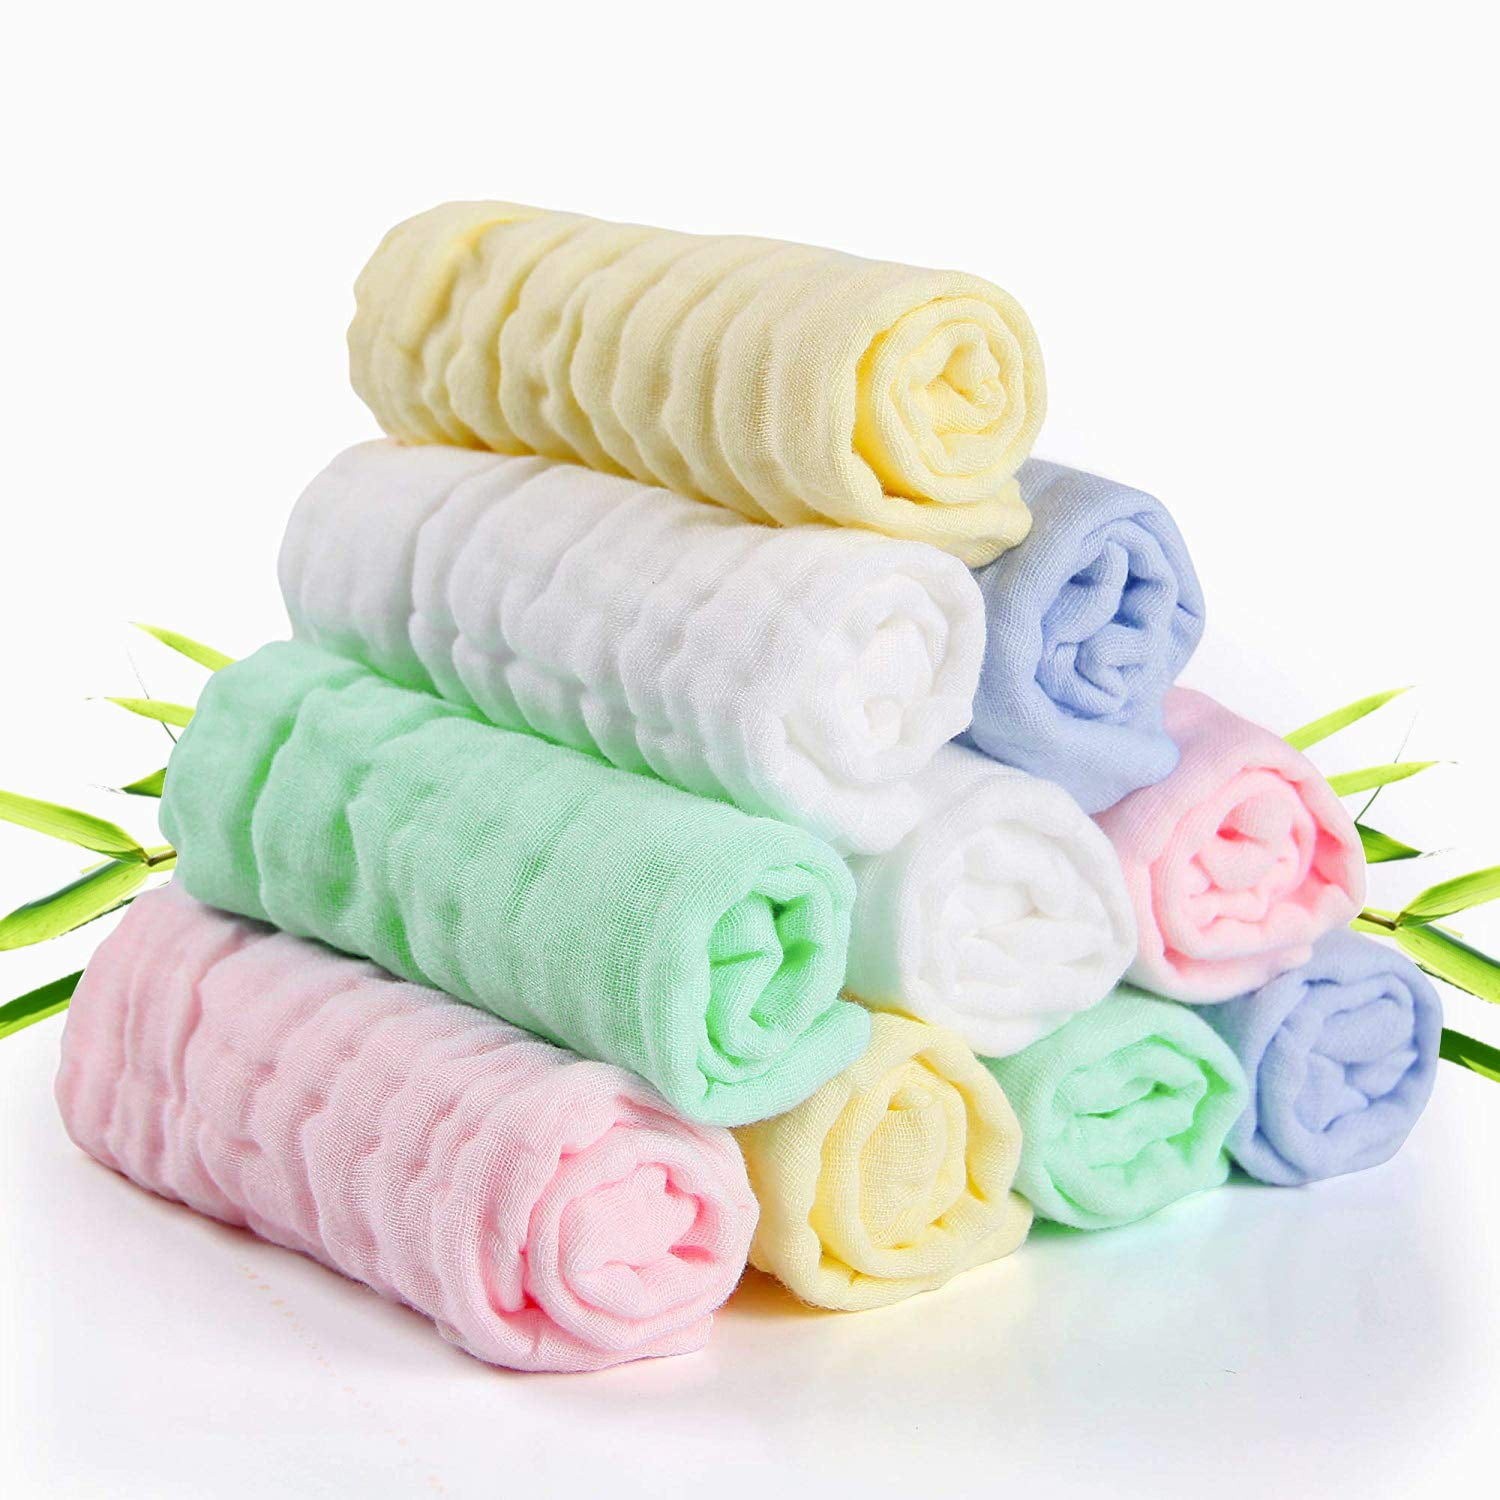 Newborn Infant Cloth & Towel Ultra Soft Thick Cleaning for Sensitive Skin  Baby Absorbent Baby Washcloths Kitchen Towels Washcloth for Bathroom